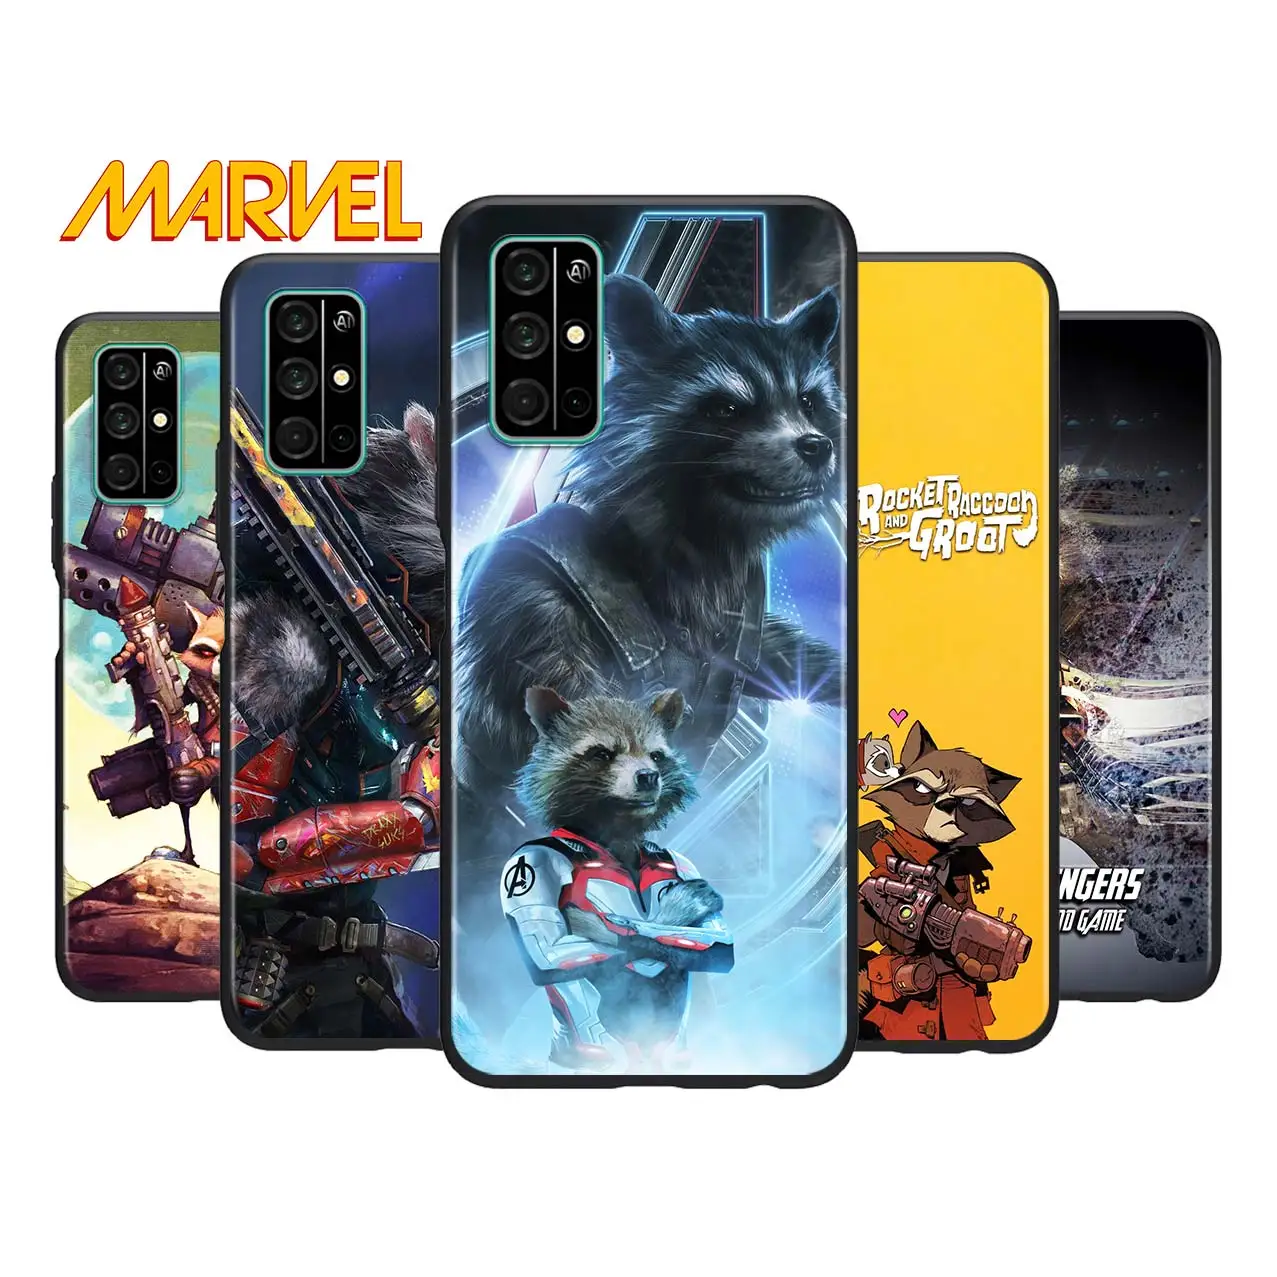 

Rocket Racoon Marvel cute for Huawei Honor V30 20 Pro X10 9S 9A 9C 9X 8X 10 9 Lite 8A 7C 7A Pro TPU Soft Black Phone Case